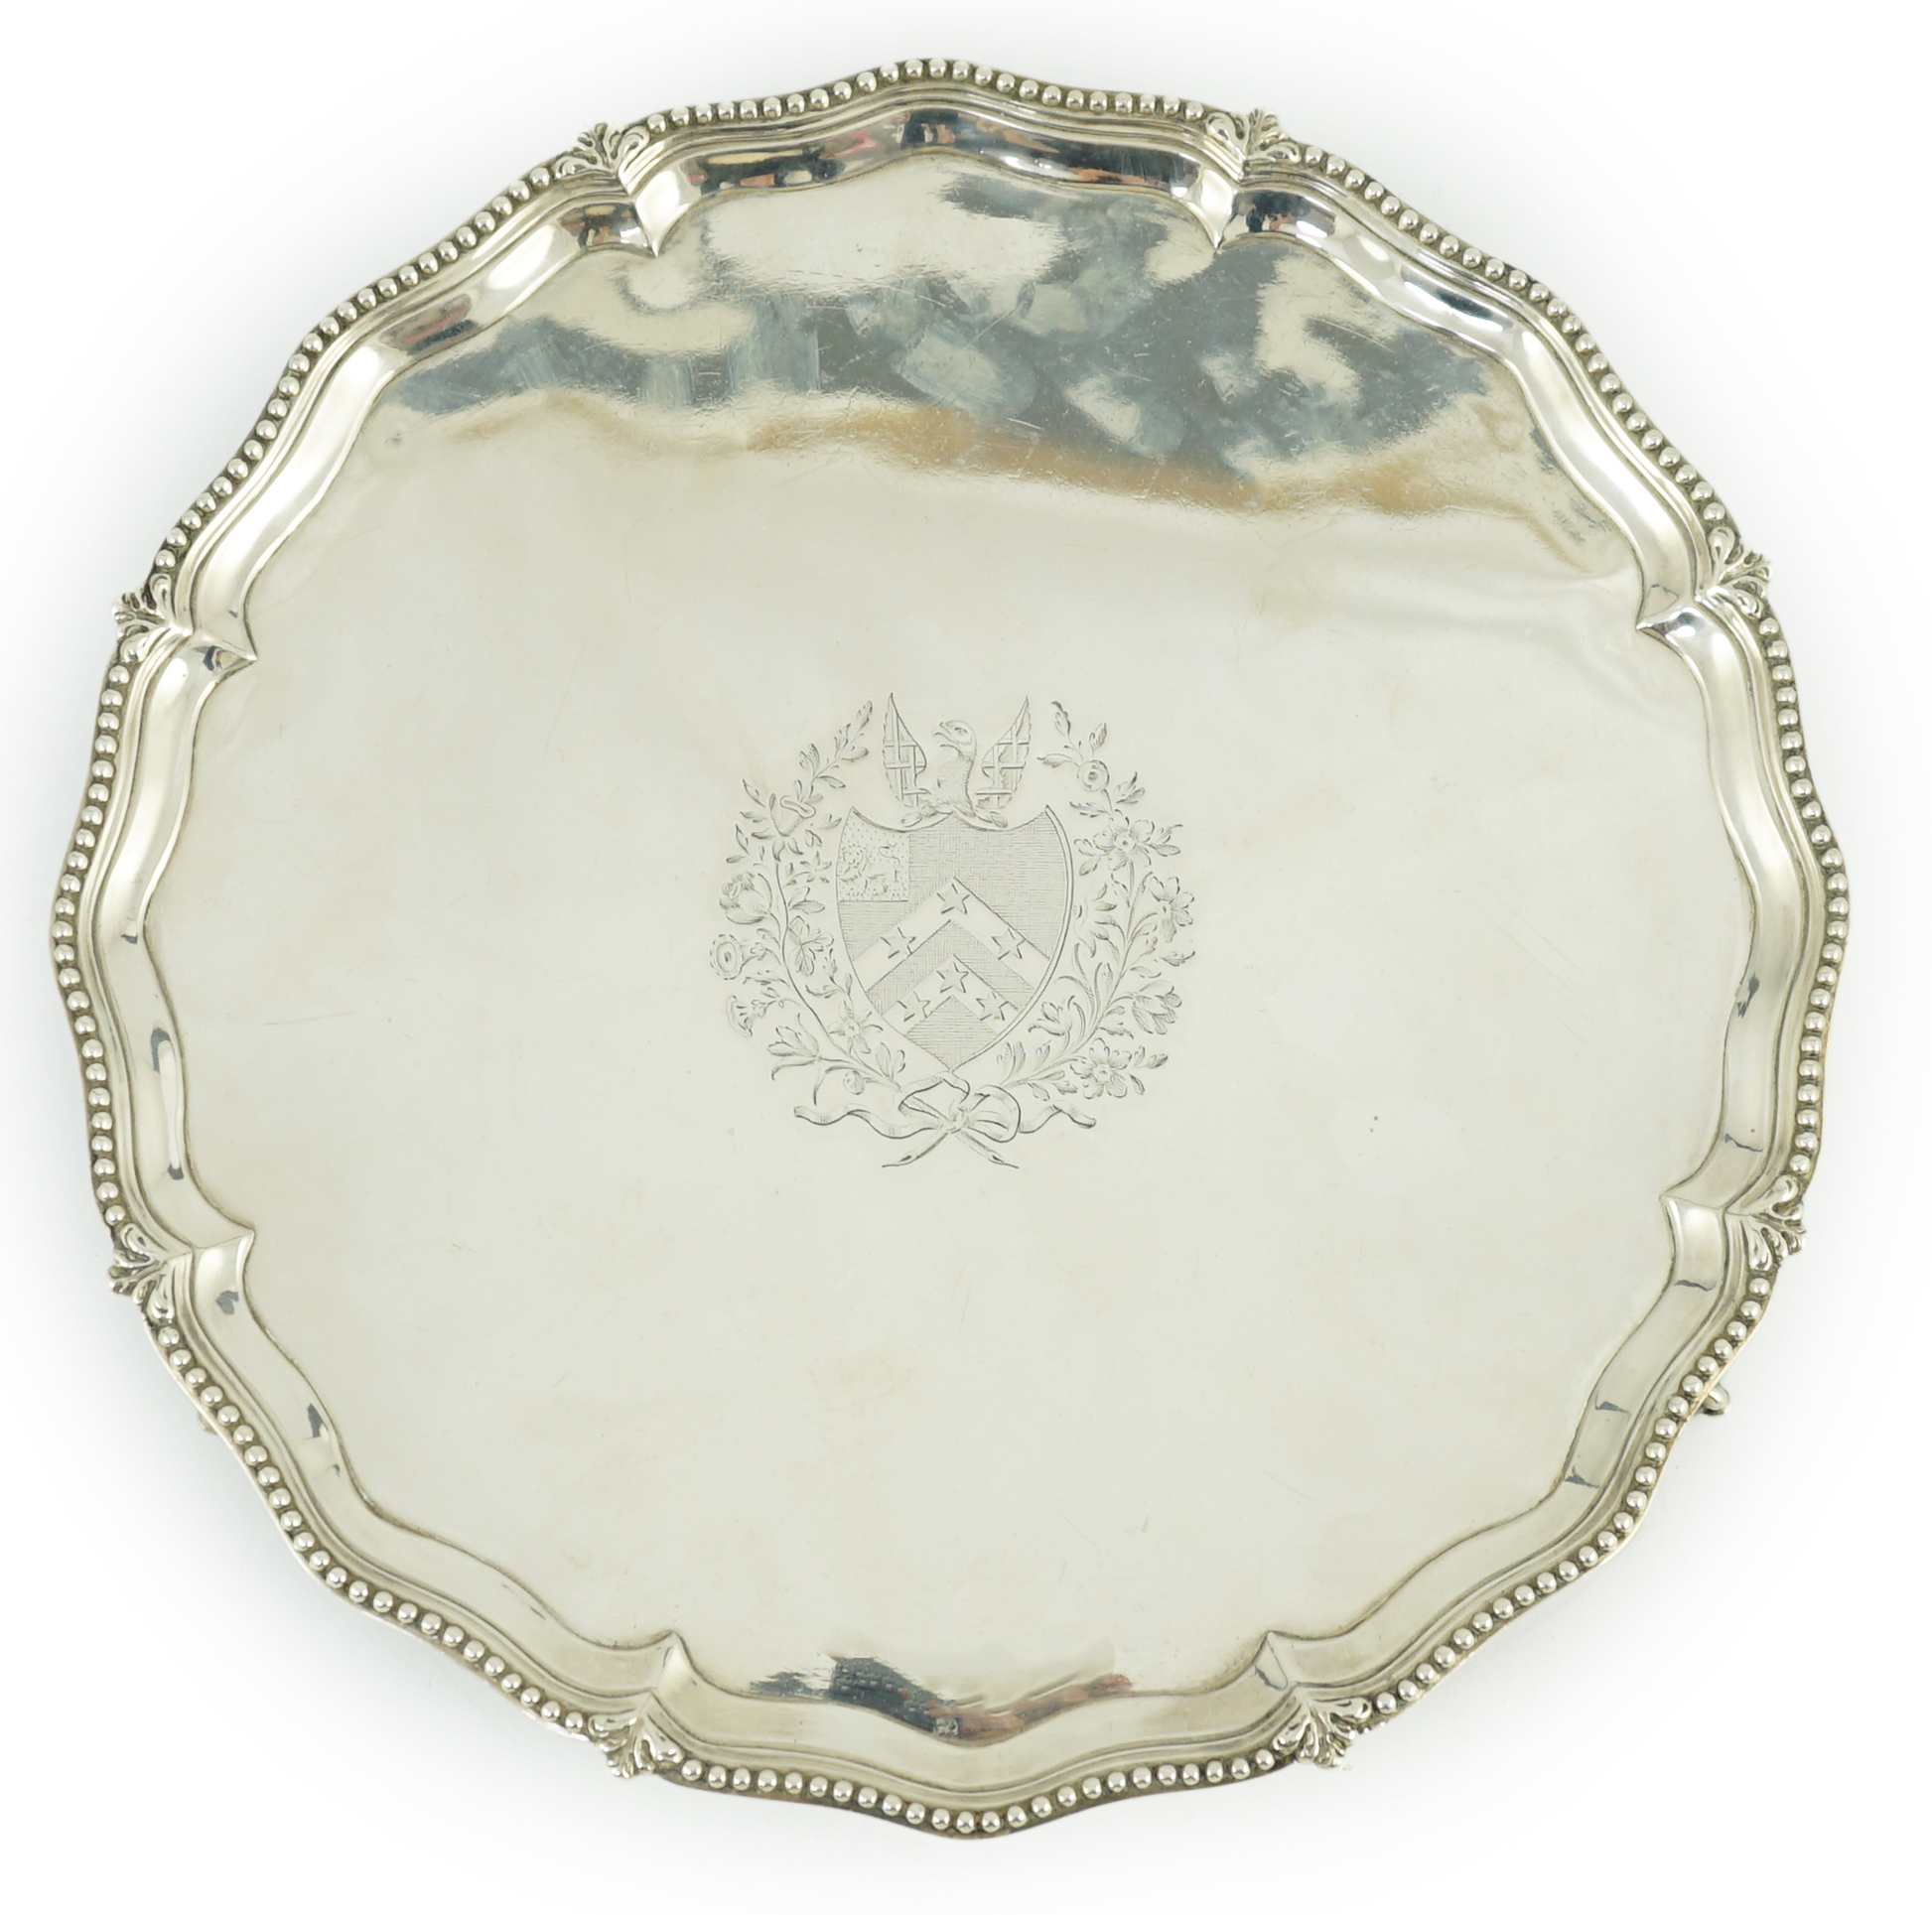 A George III silver salver, by John Crouch I and Thomas Hannam, of shaped circular form, with beaded